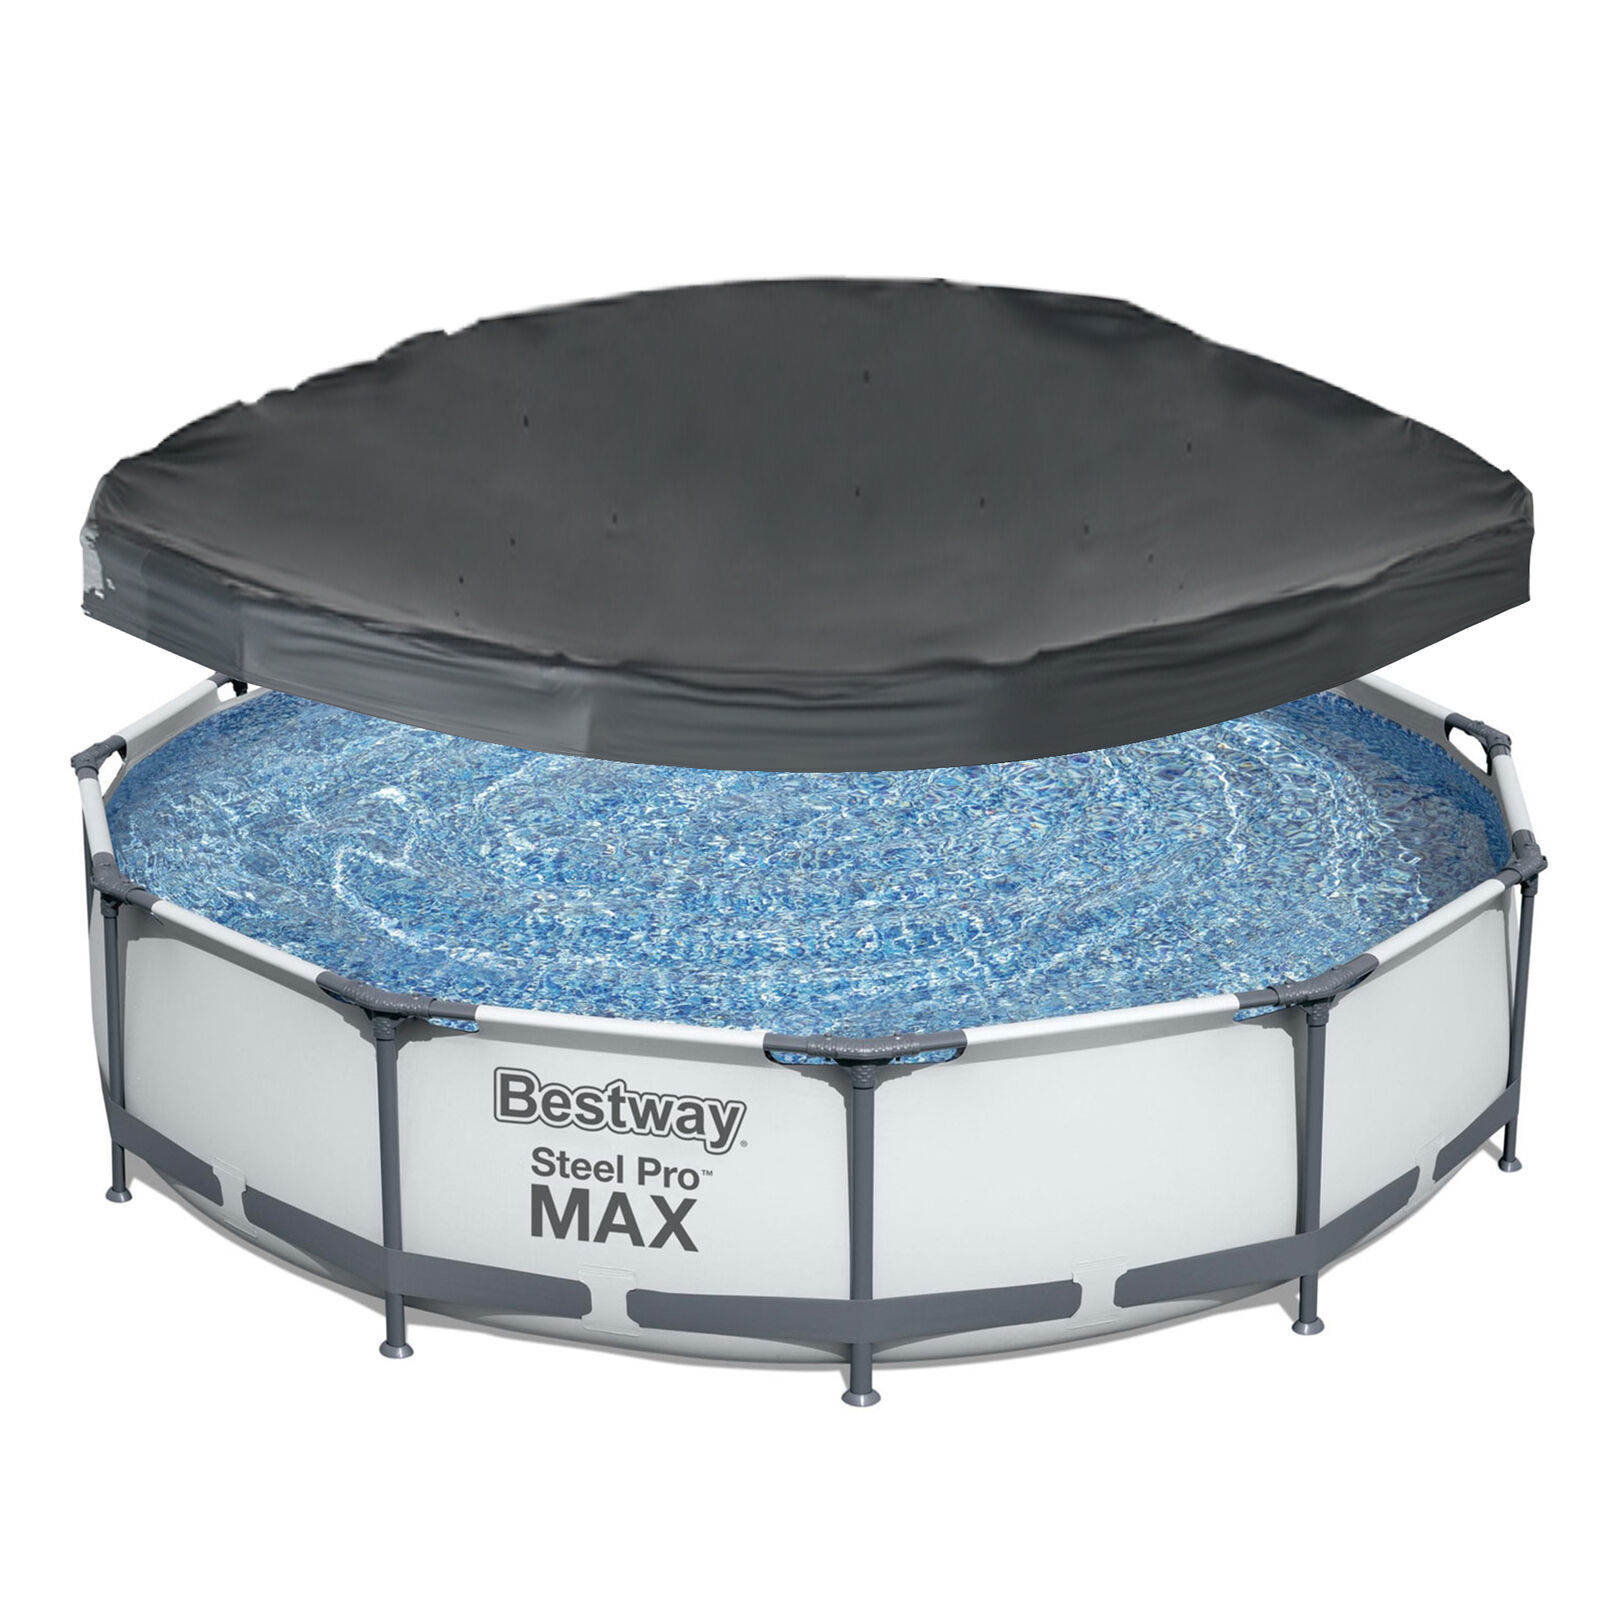 Bestway Steel Pro Max 12' x 30" Round Above Ground Frame Pool & Flowclear Cover - $249.99